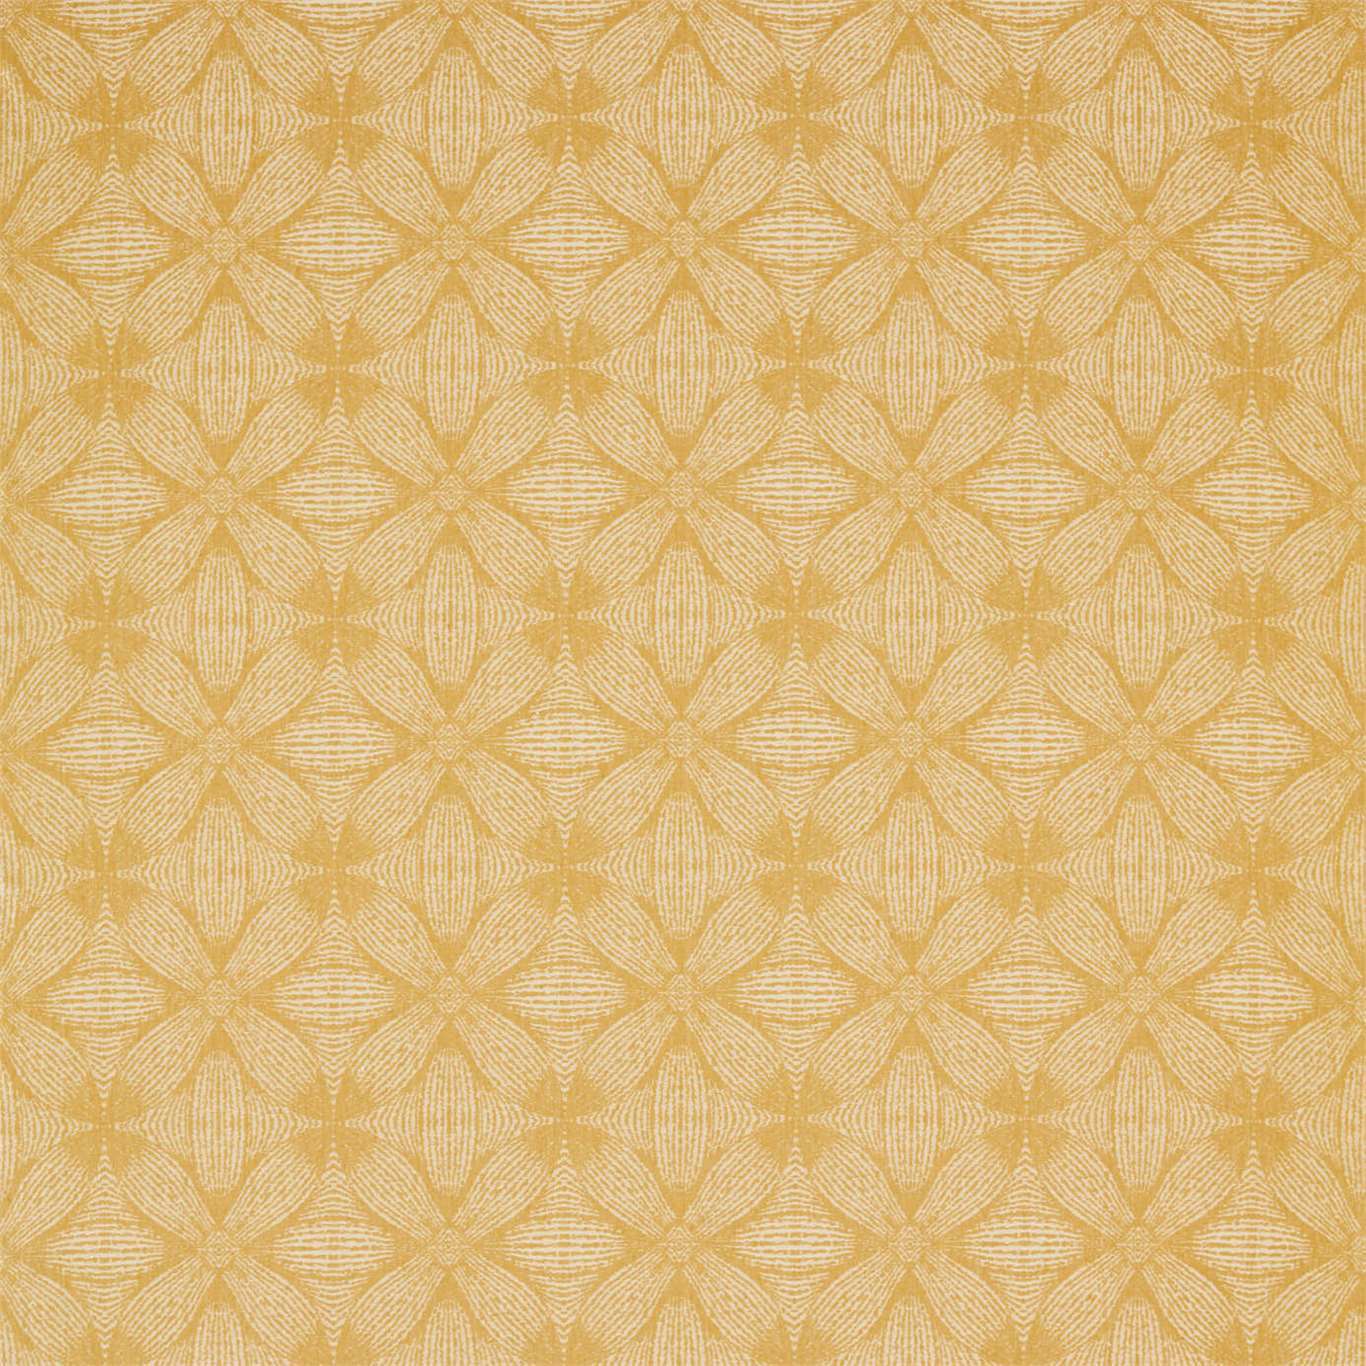 Sycamore Weave Mustard Seed Fabric by SAN